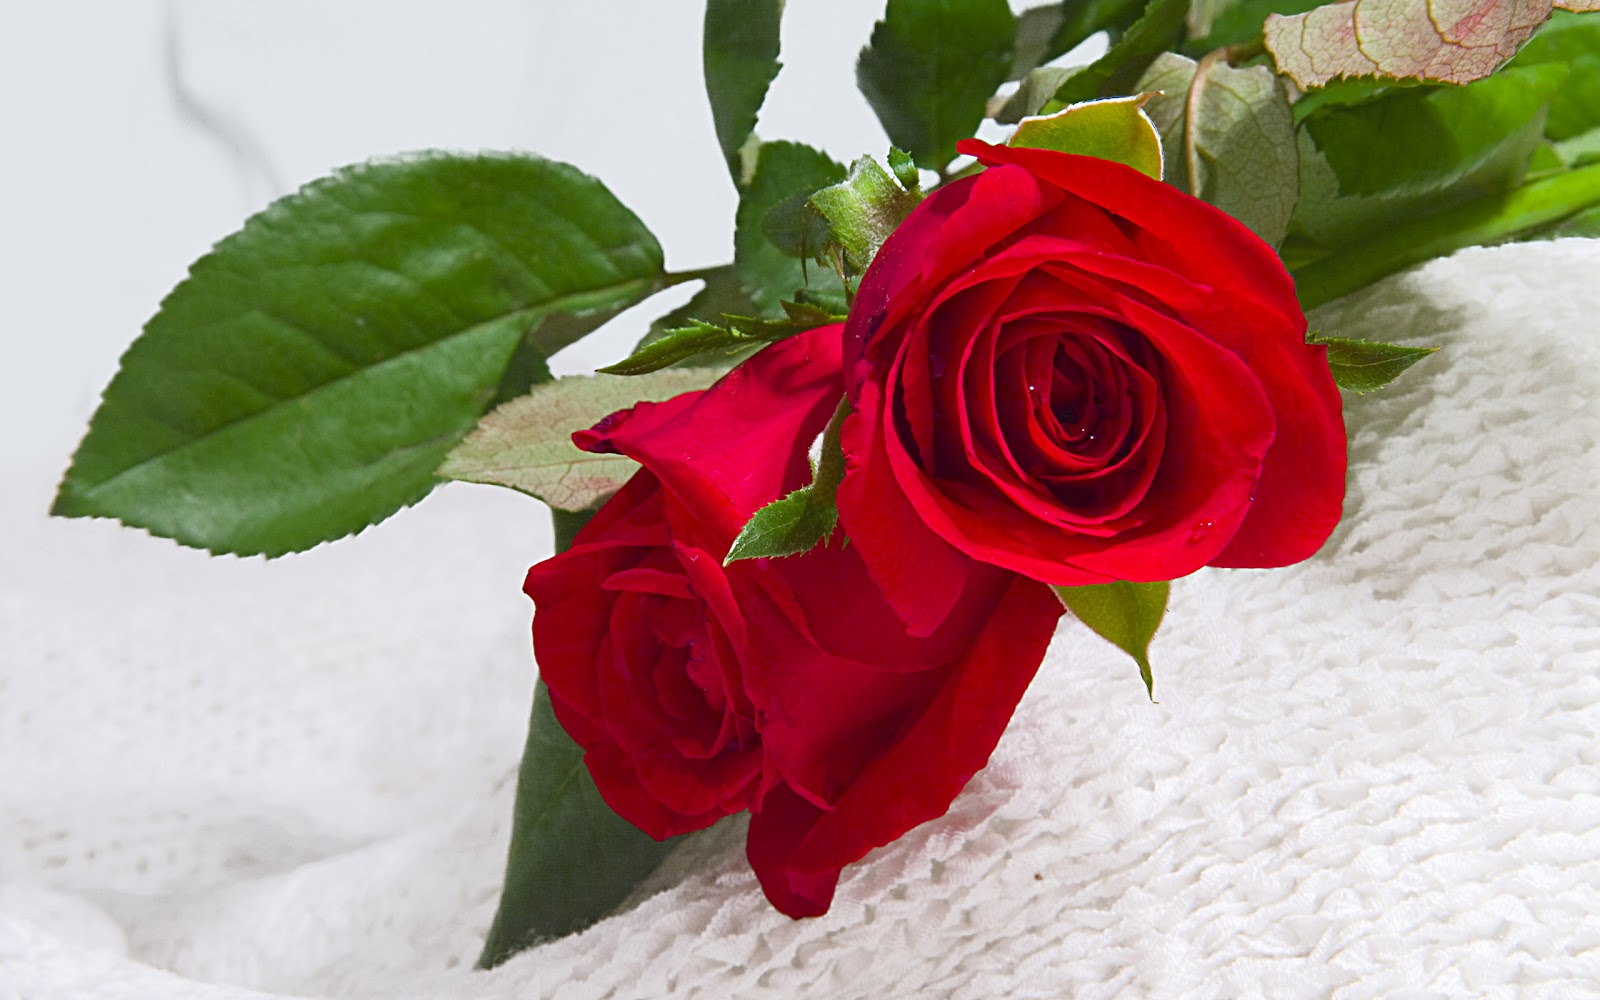 two red roses free 4k background wallpaperss hd